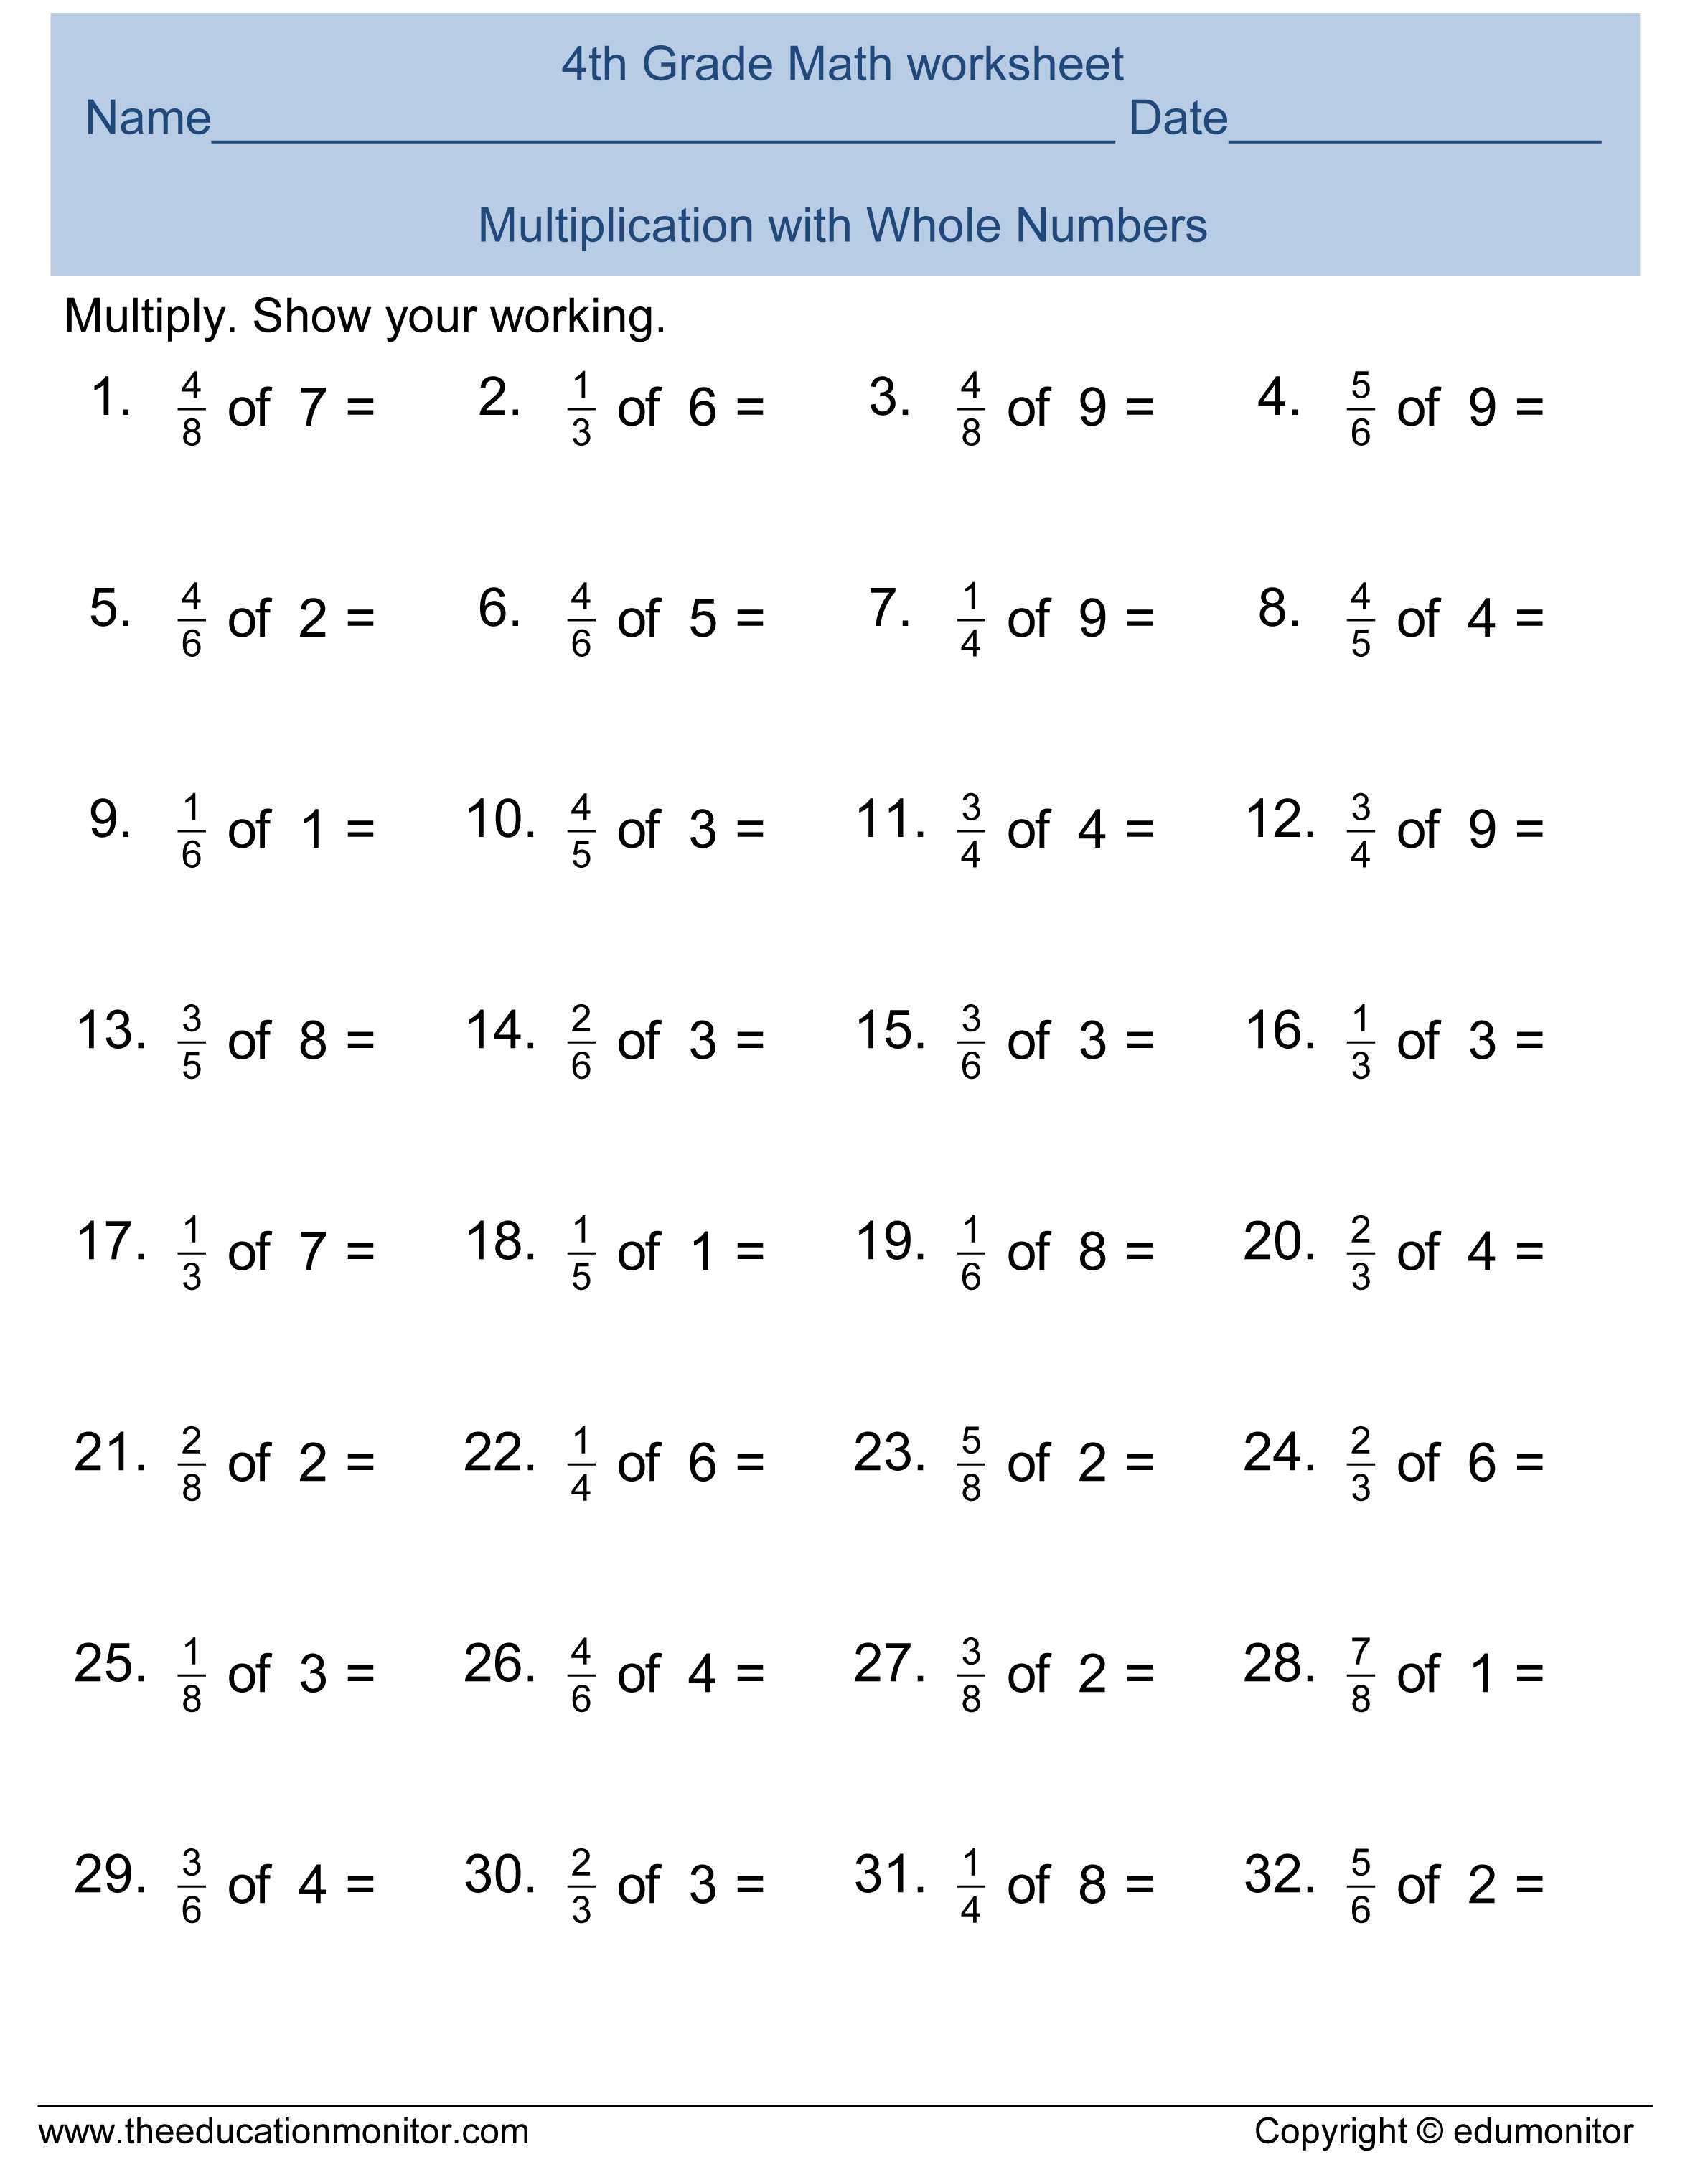 Subtracting Integers Worksheet Along with Fractions Adding and Subtracting Fractions Worksheets 4th Grade